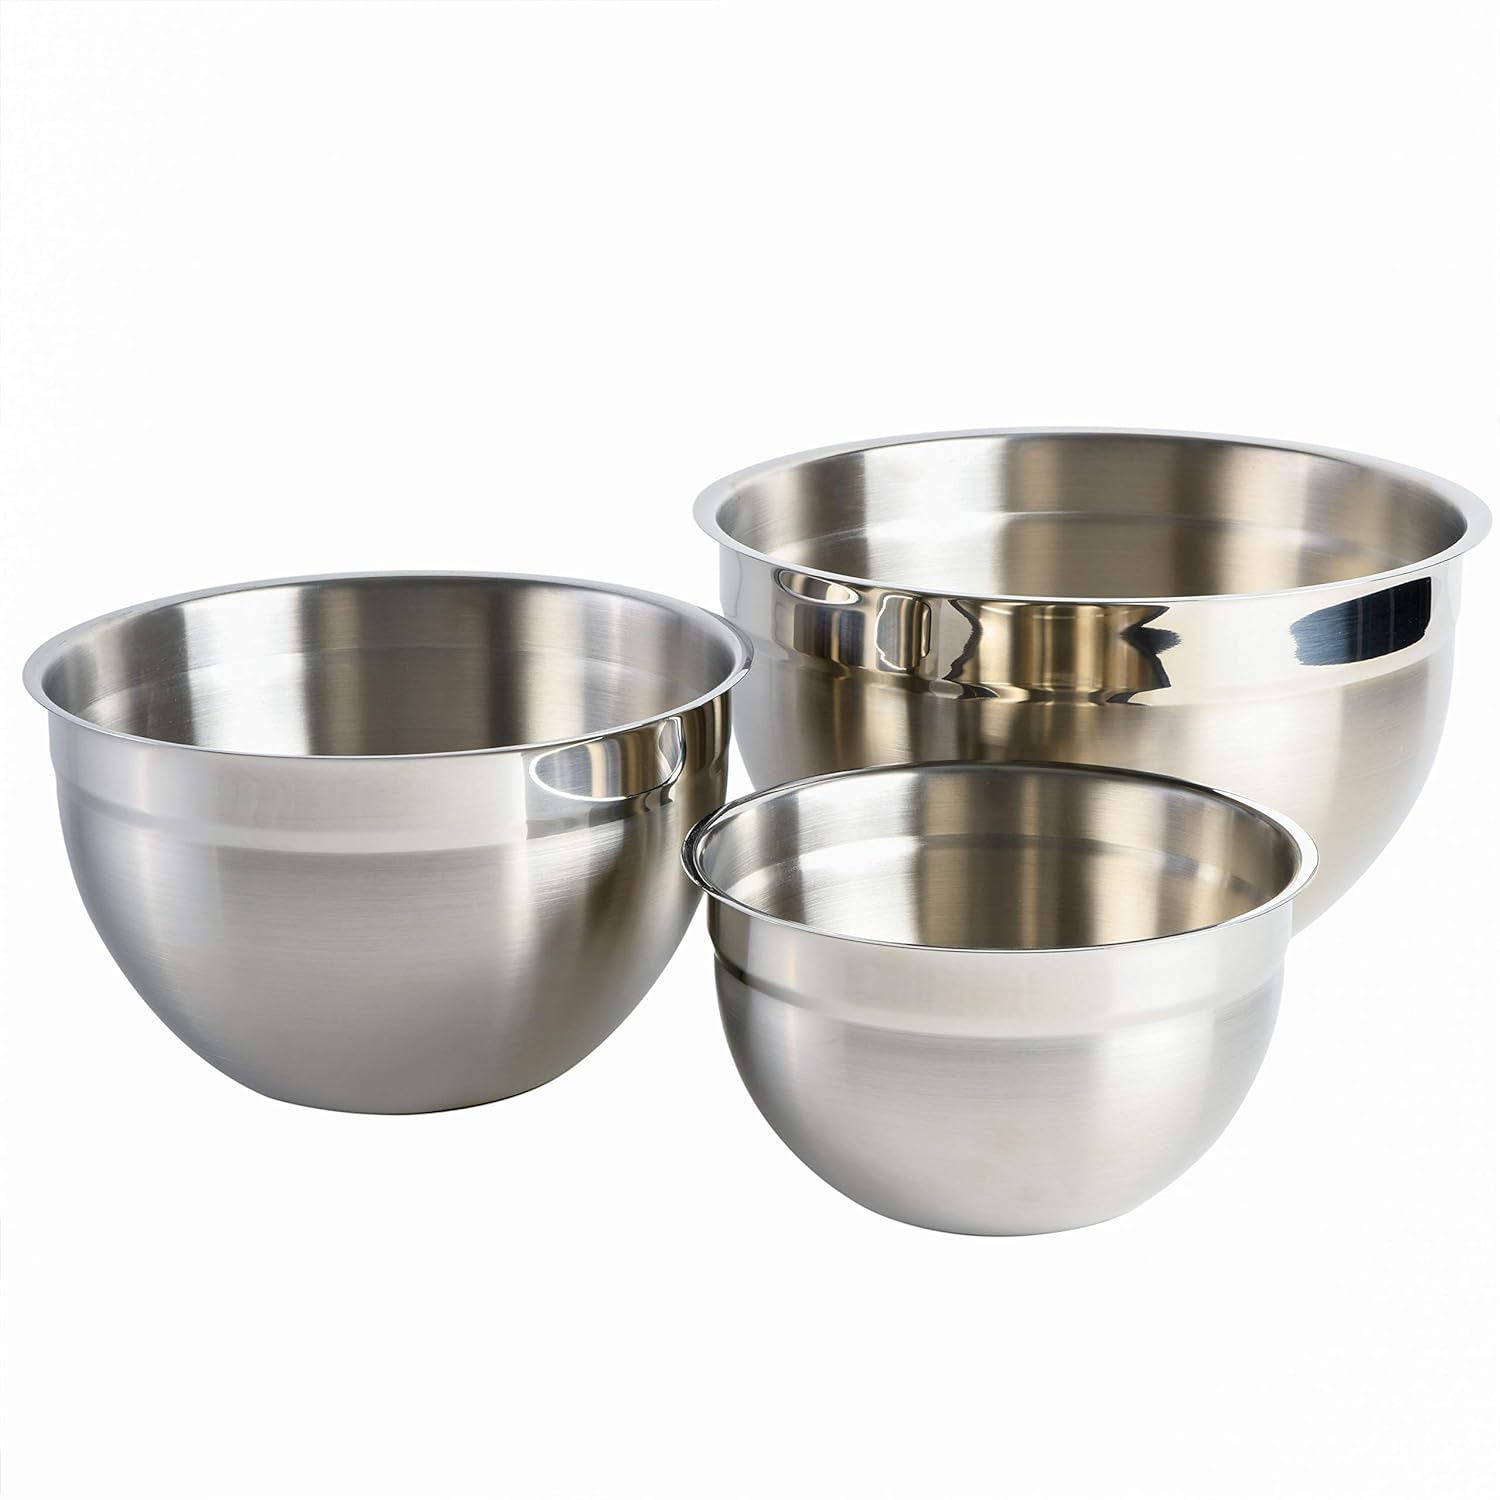  <strong>Babish 3-Piece Stainless Steel Prep Bowl Set</strong> 